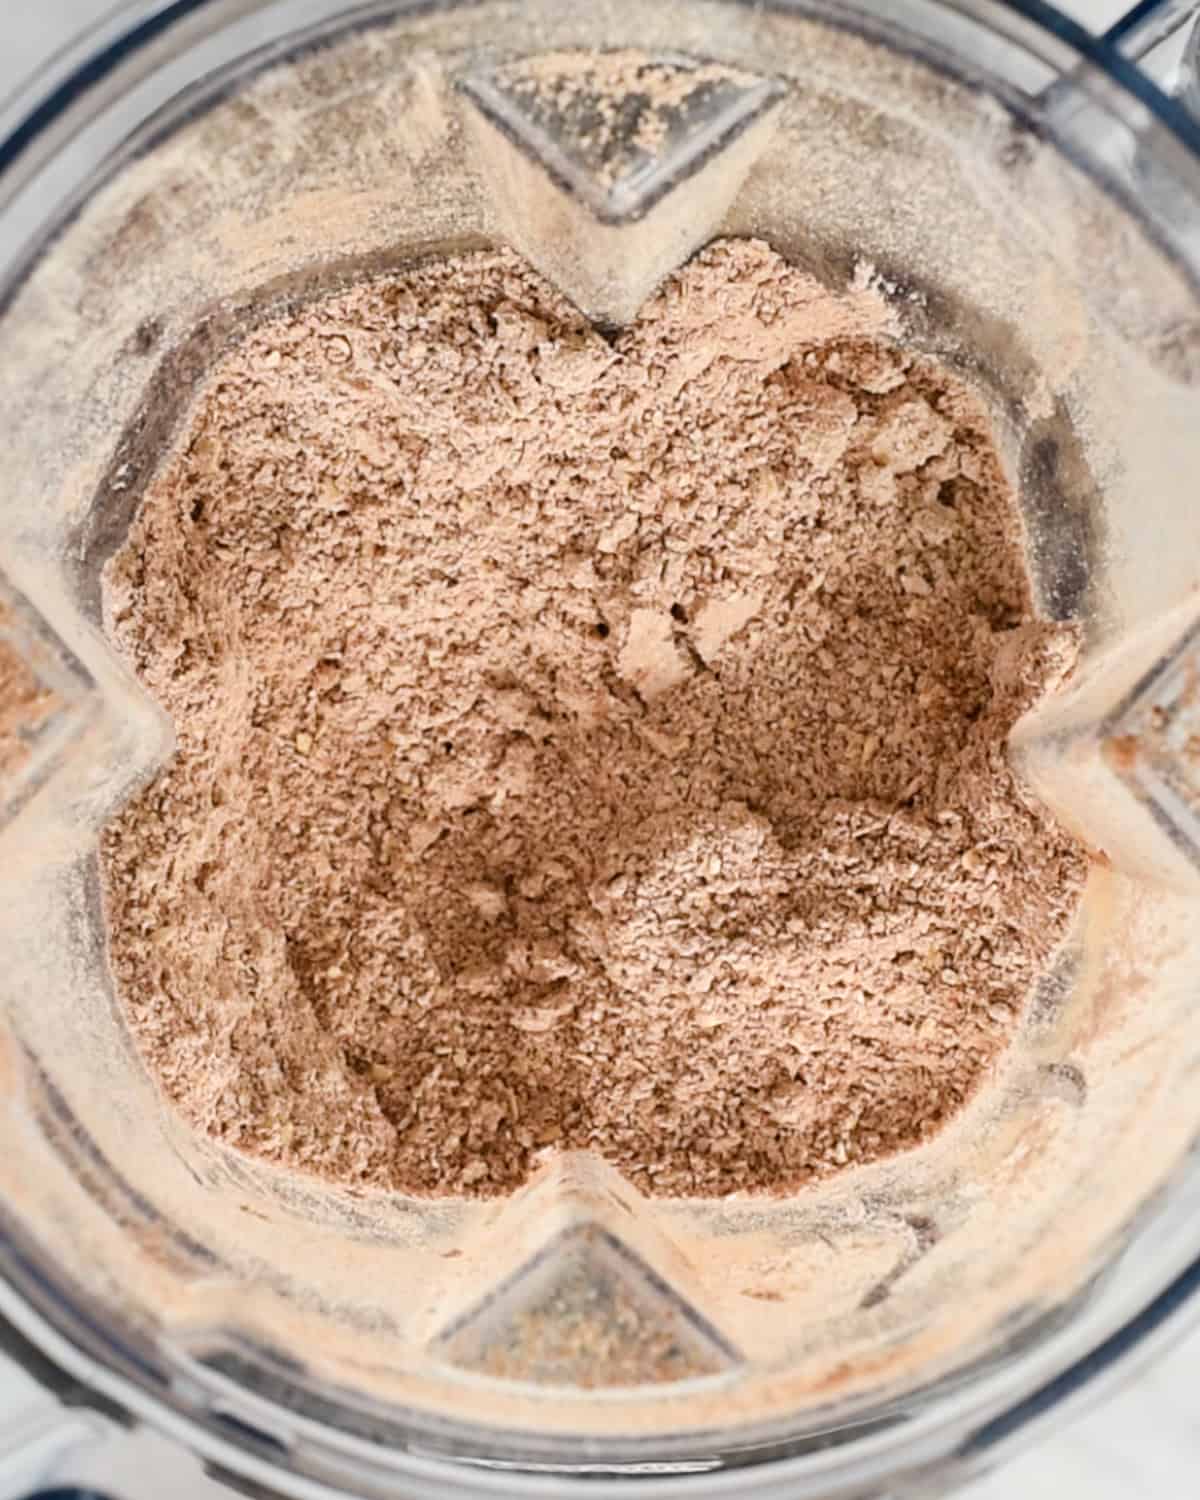 oats and cocoa powder in the container of a blender after blending to make Healthy Chocolate Pancakes 